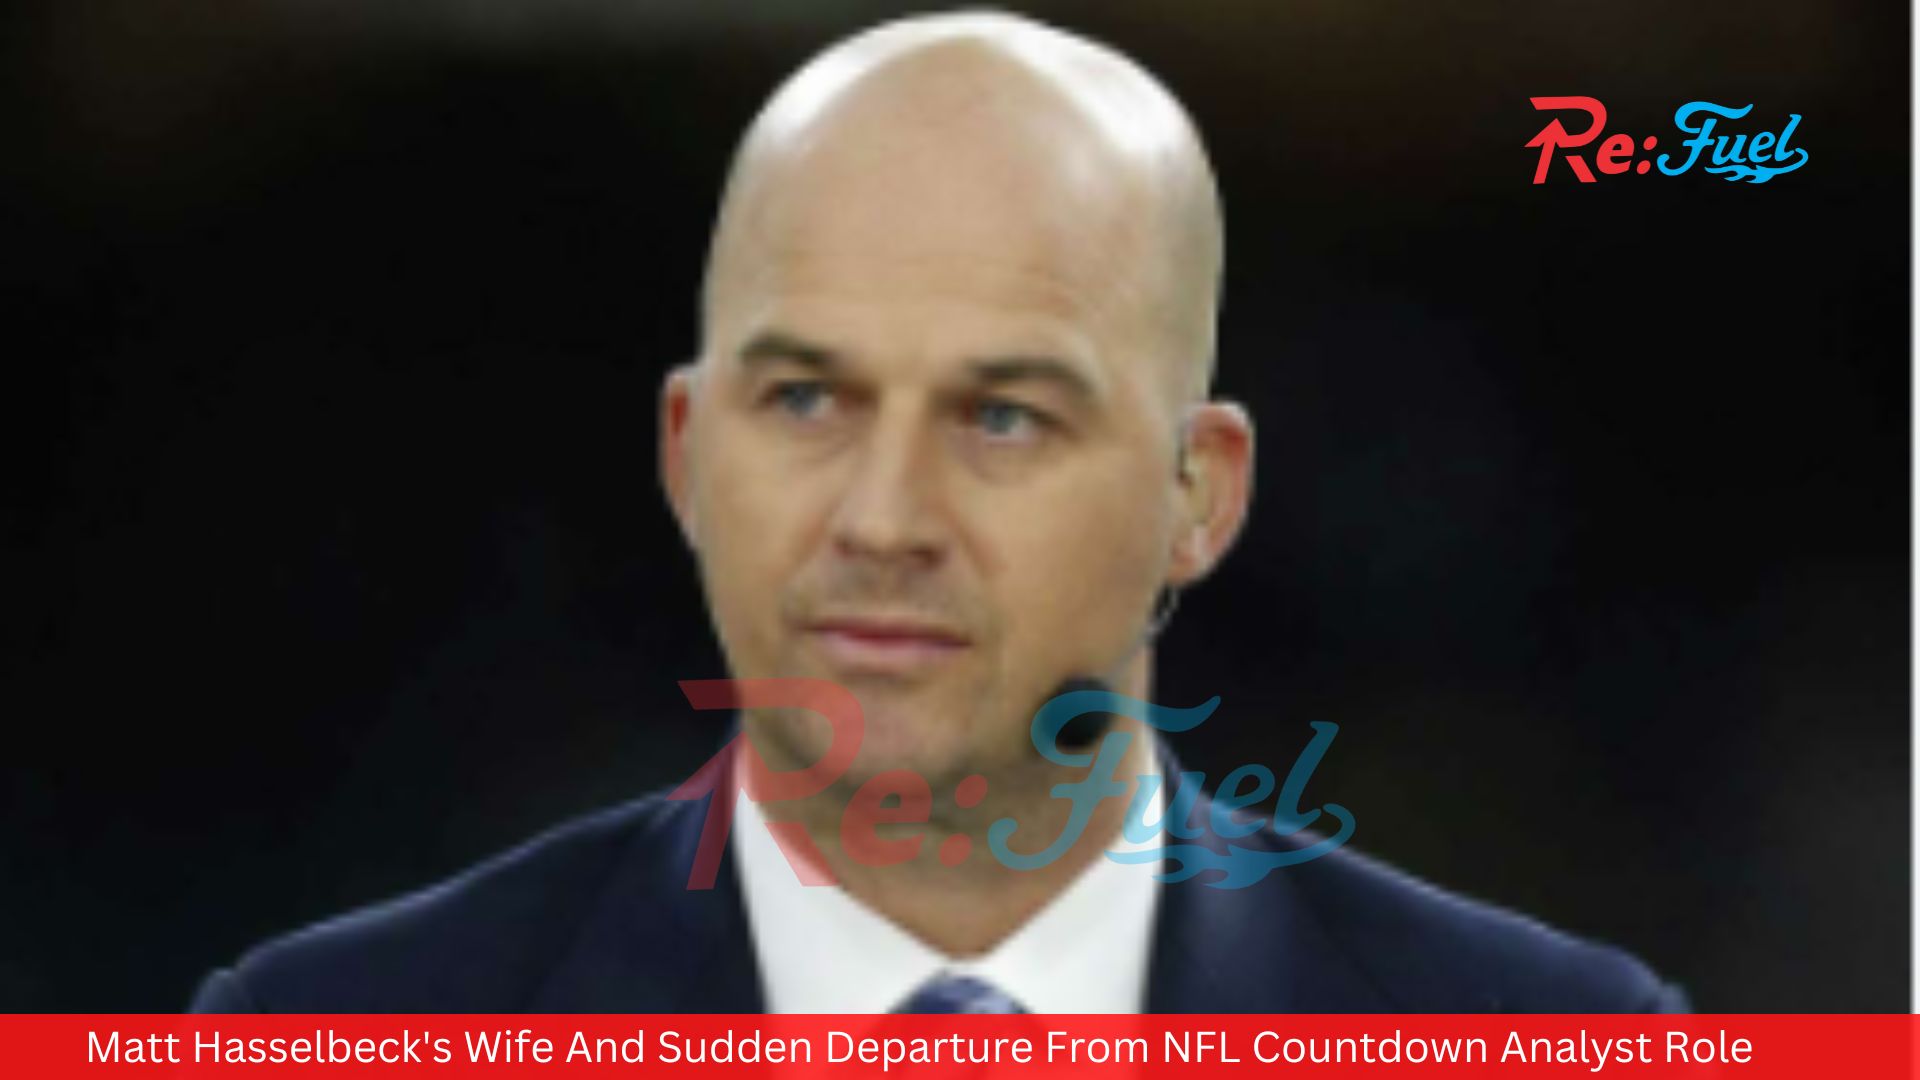 Matt Hasselbeck's Wife And Sudden Departure From NFL Countdown Analyst Role